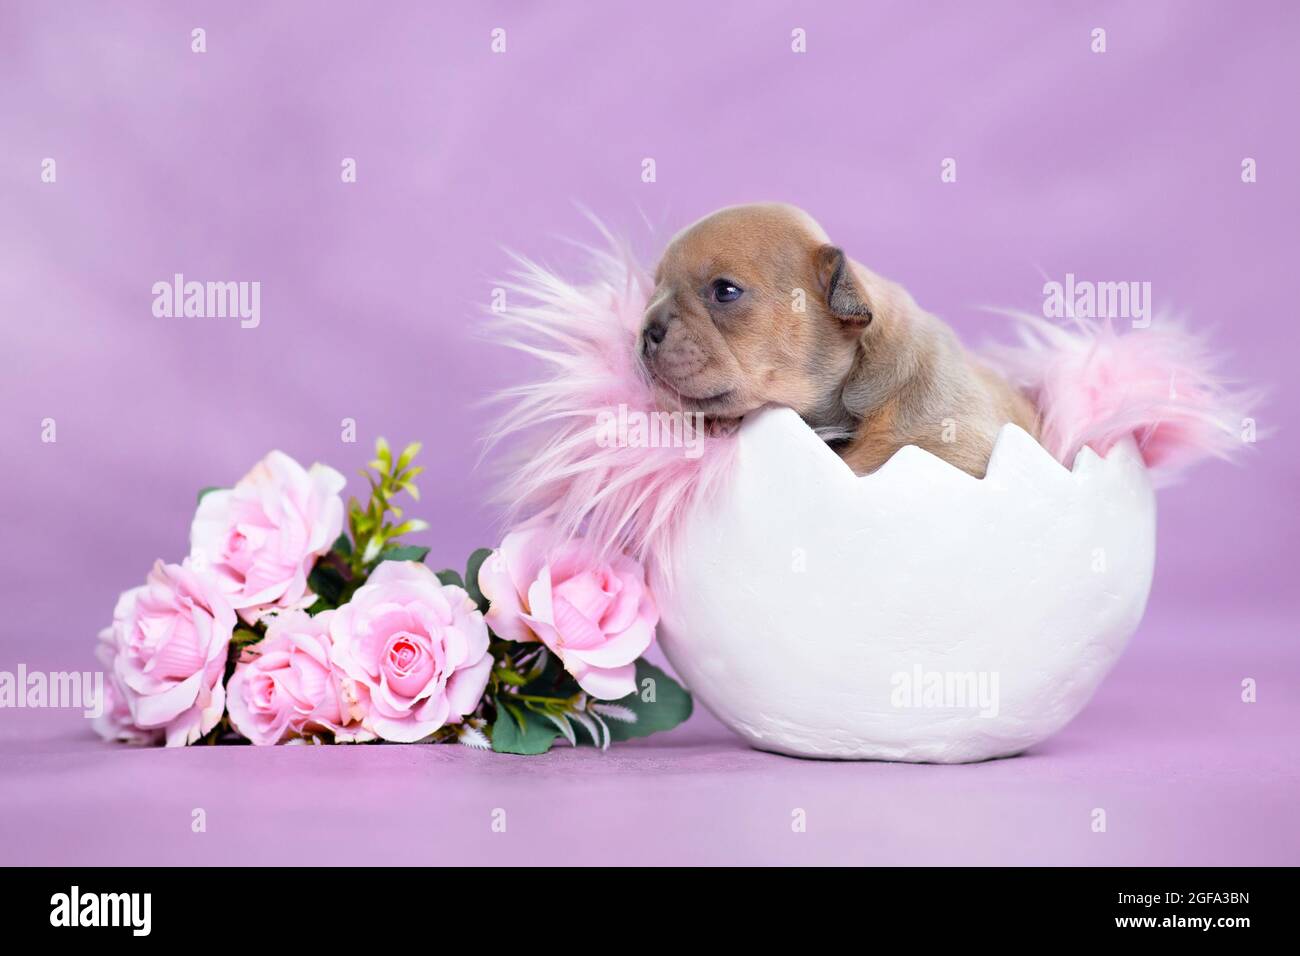 French Bulldog dog puppy hatching out of egg shell next to roses Stock Photo